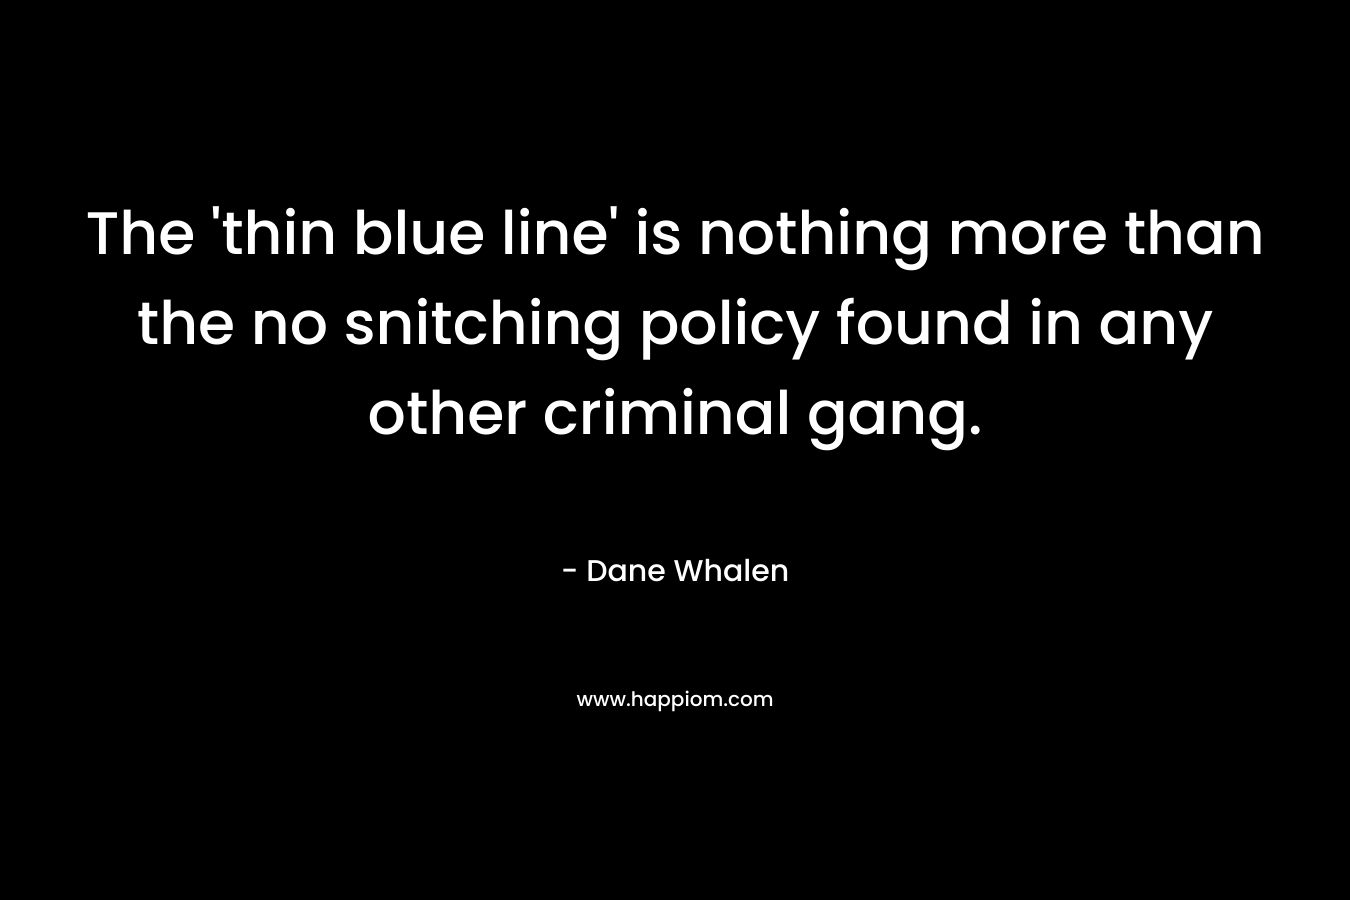 The 'thin blue line' is nothing more than the no snitching policy found in any other criminal gang.